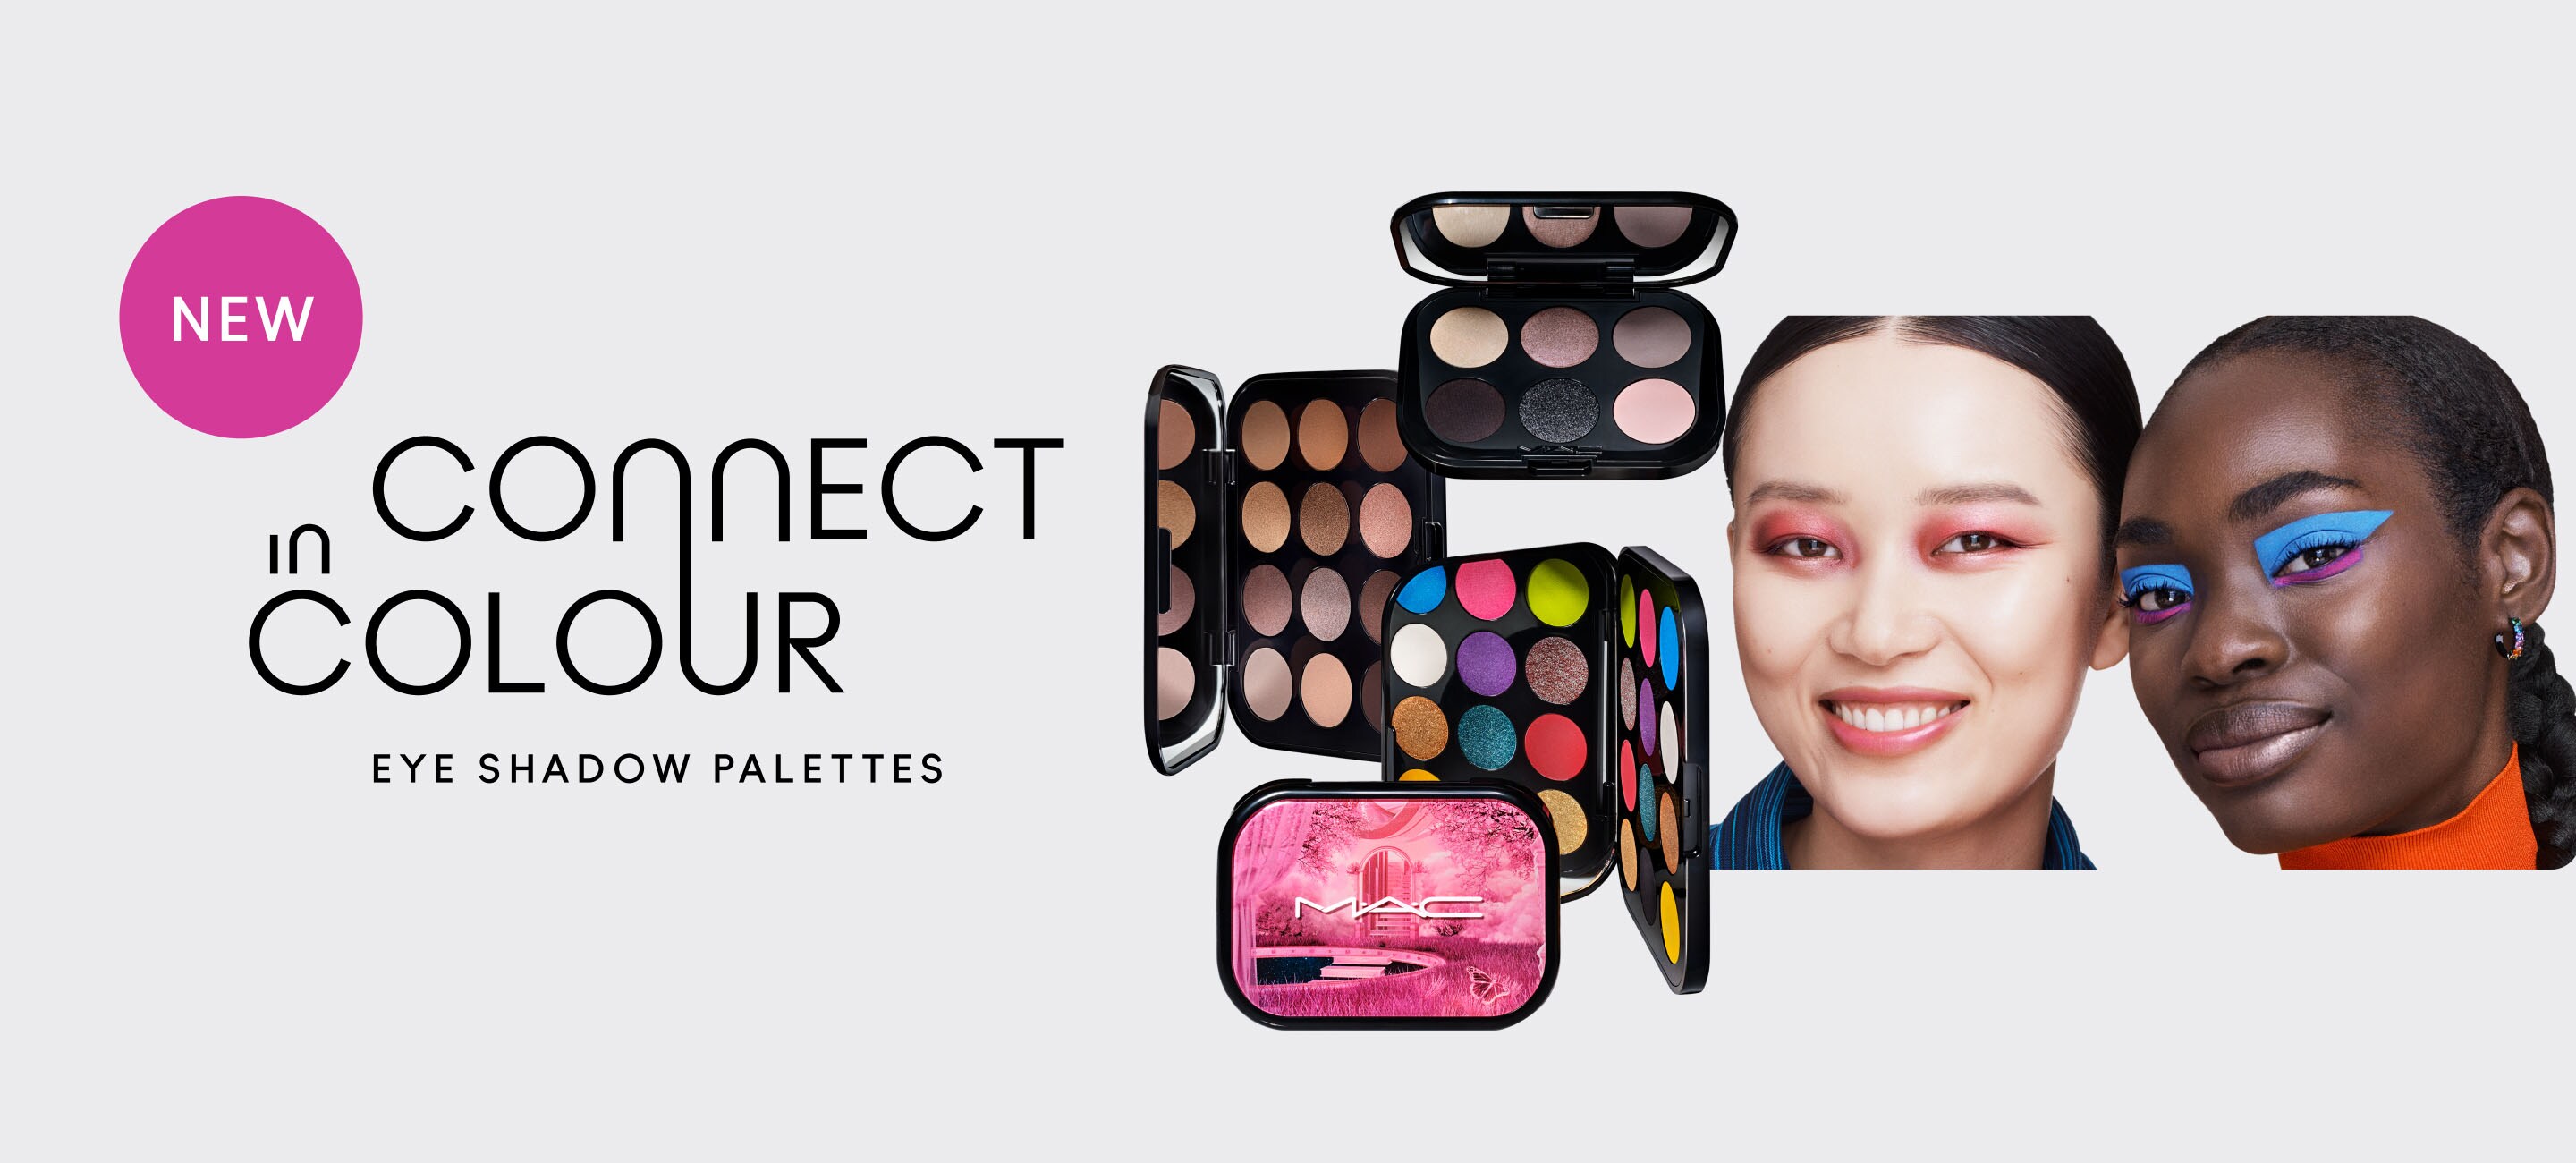 M·A·CSTACK CONNECT IN COLOUR EYE SHADOW PALETTE